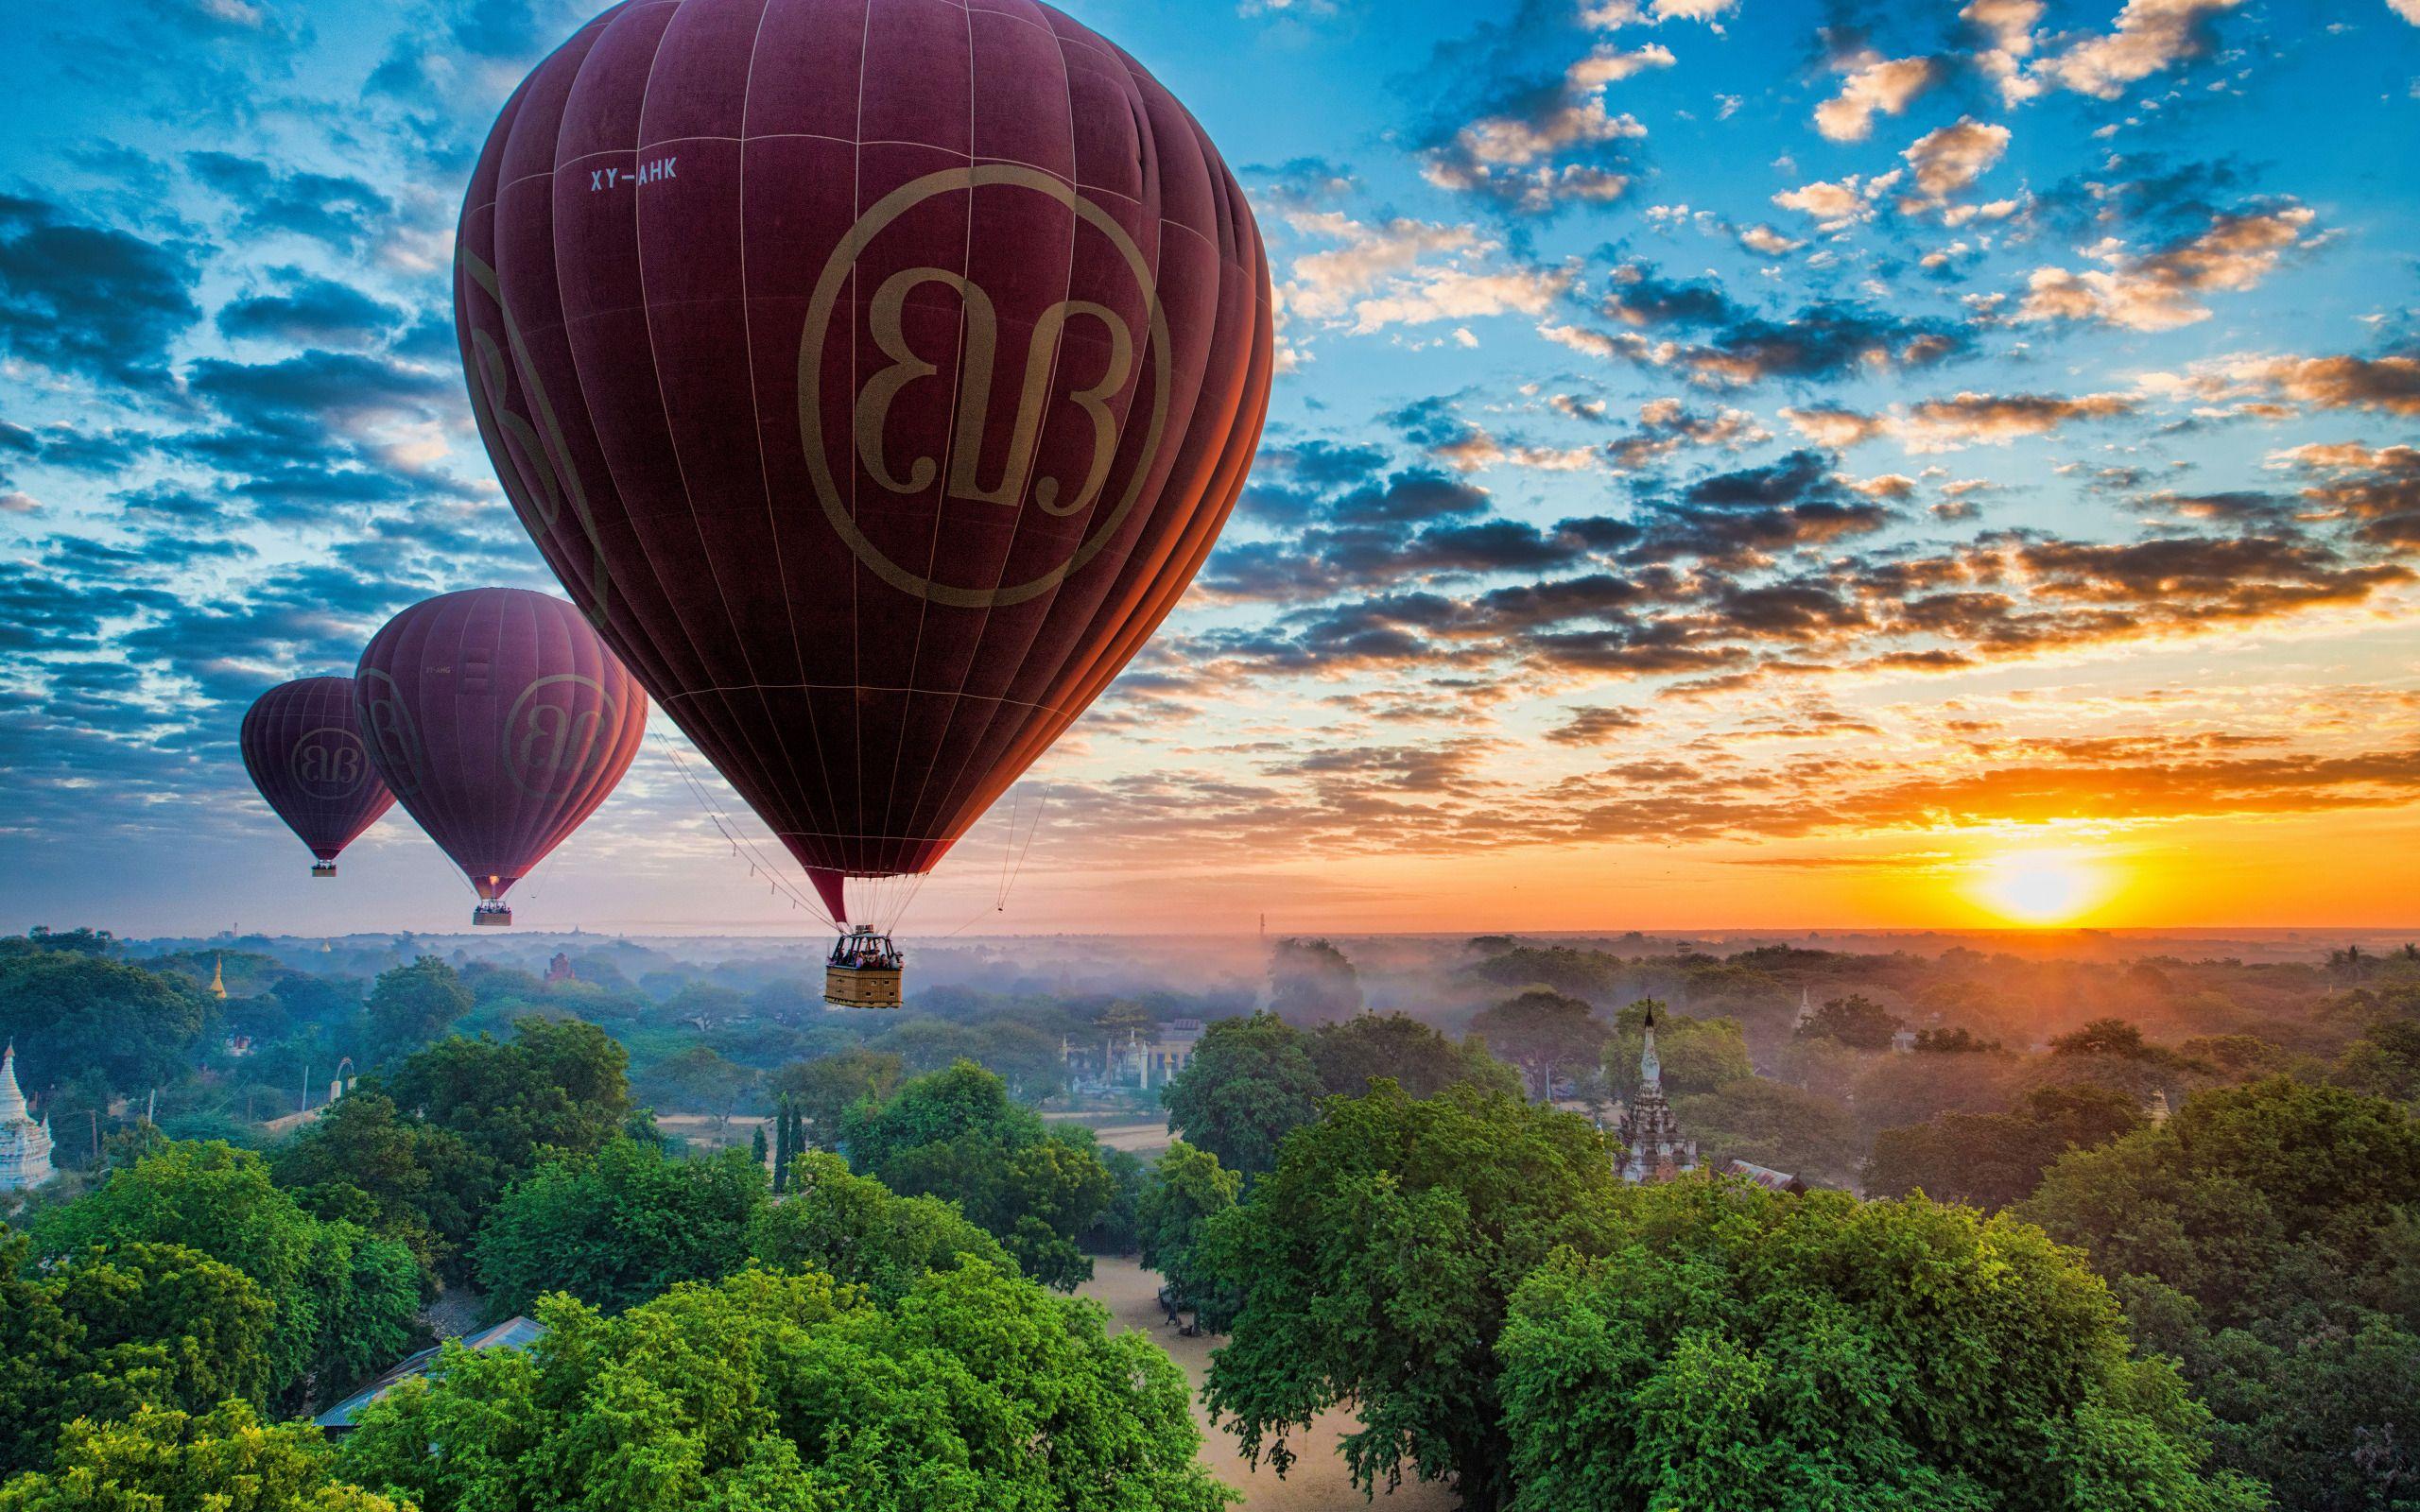 Hot Air Balloon Festival over the Temples of Bagan, Myanmar